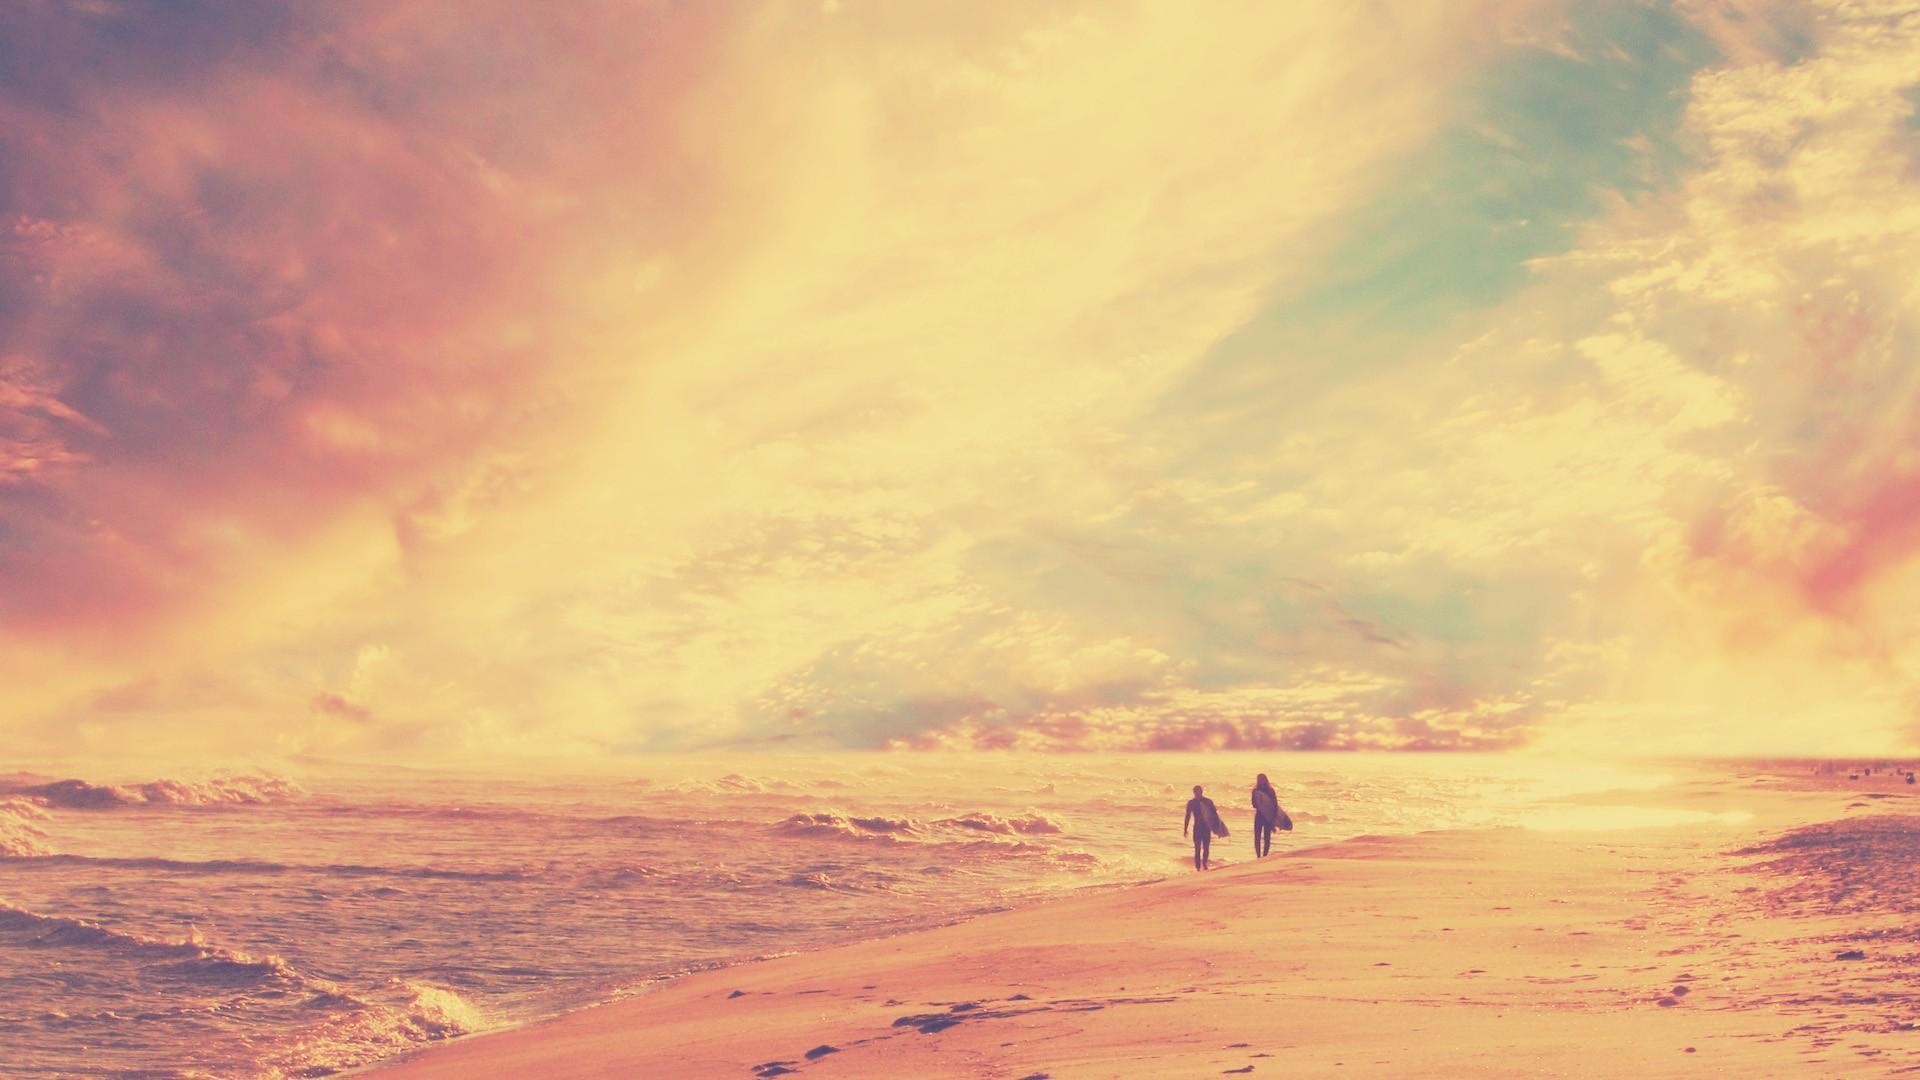 1920x1080 Wallpapers For > Tumblr Backgrounds Beach Surf